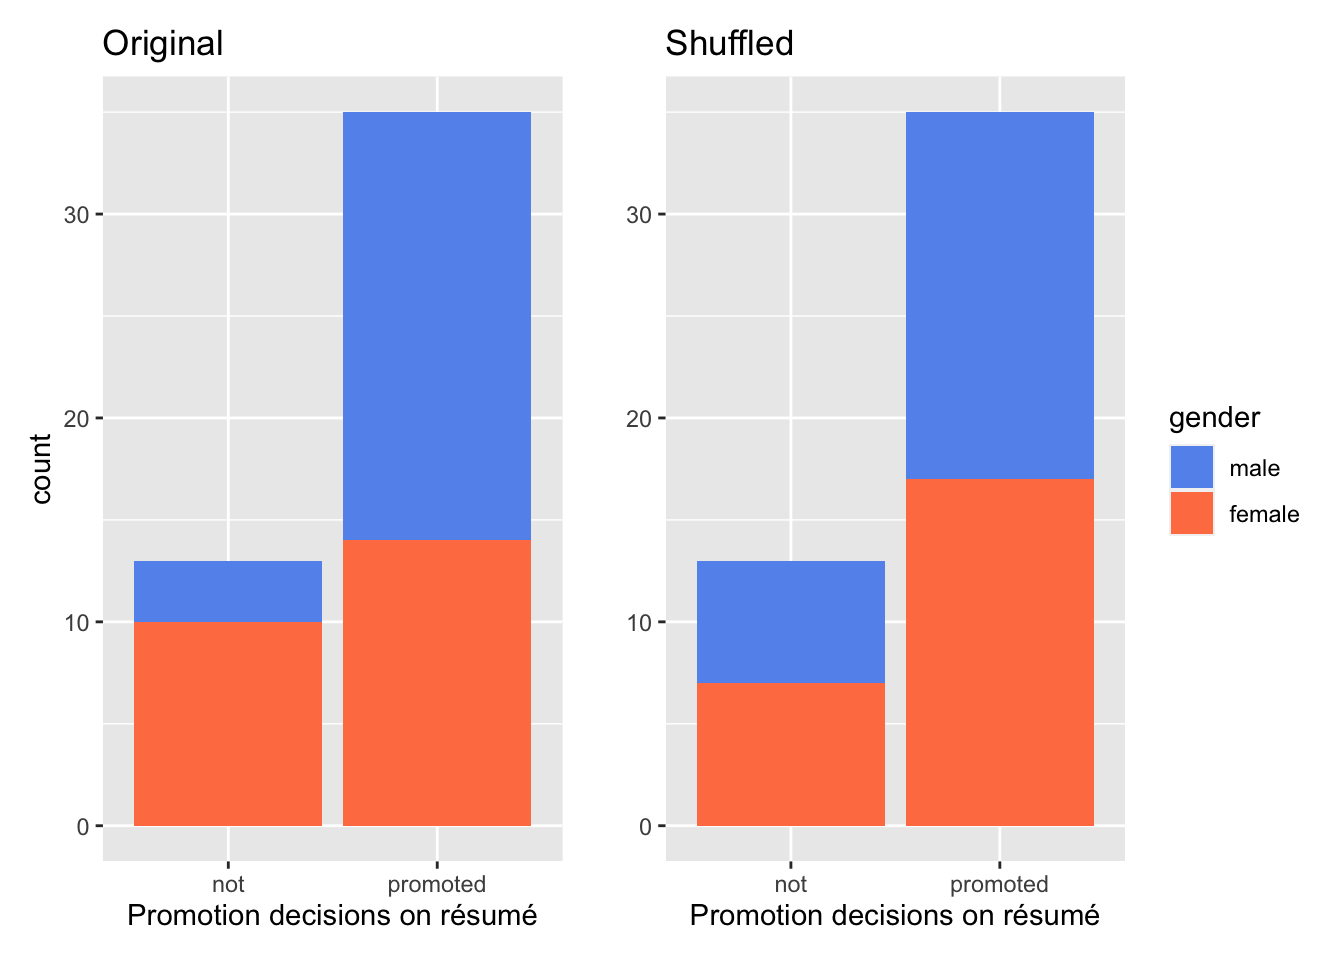 Relationship between promotion and gender for original data (left) and simulated data in the hypothesized world (right).